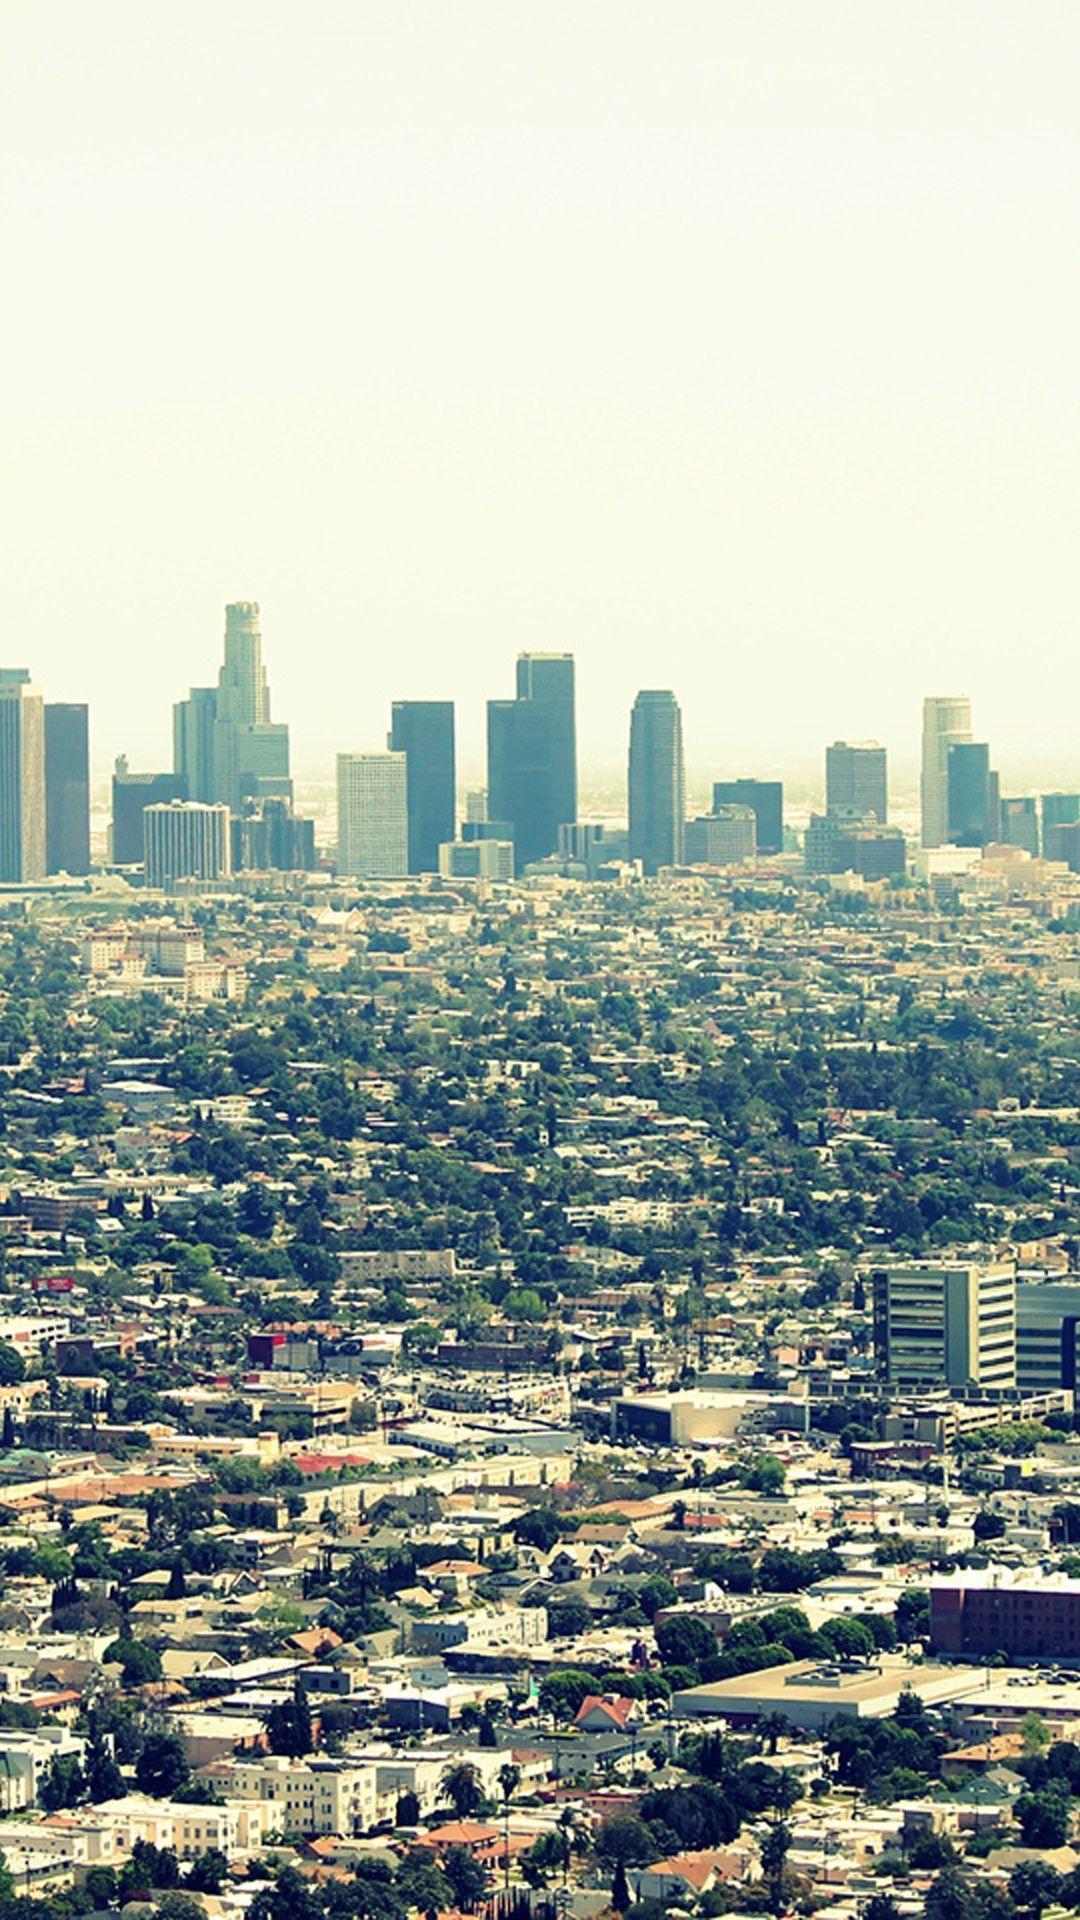 Los Angeles City View Android Wallpaper free download